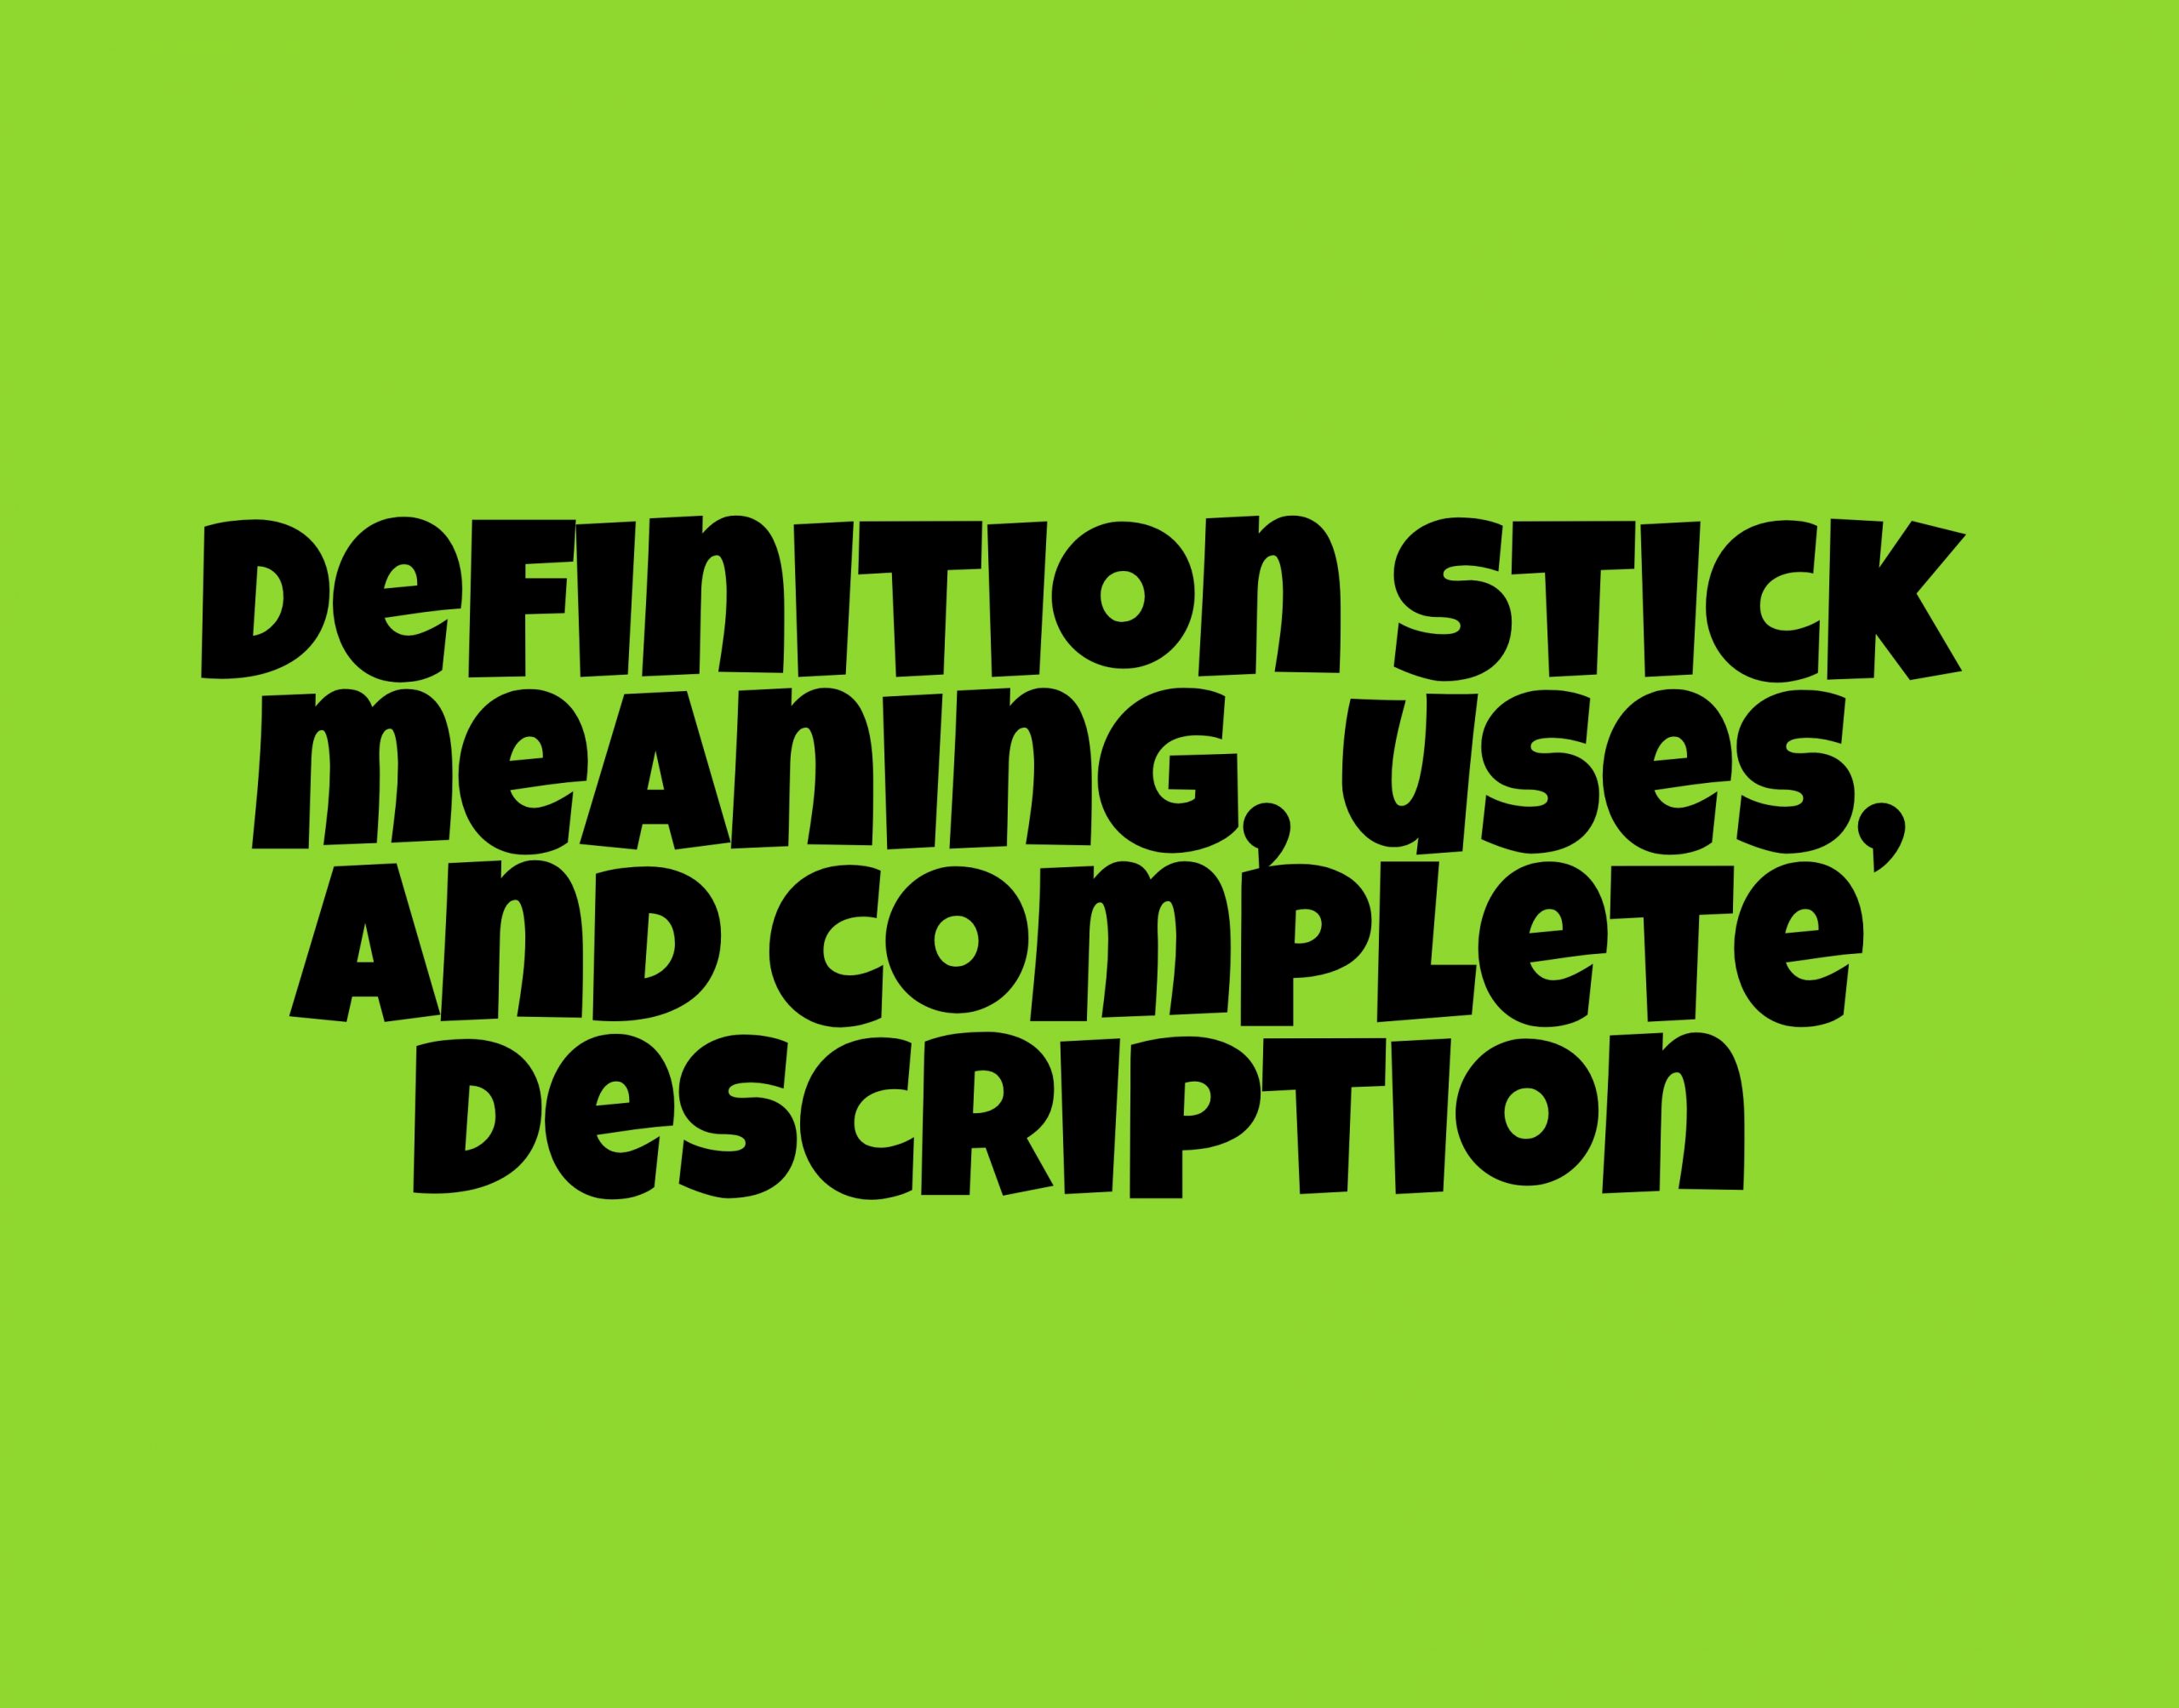 Definition stick meaning, uses, and complete description